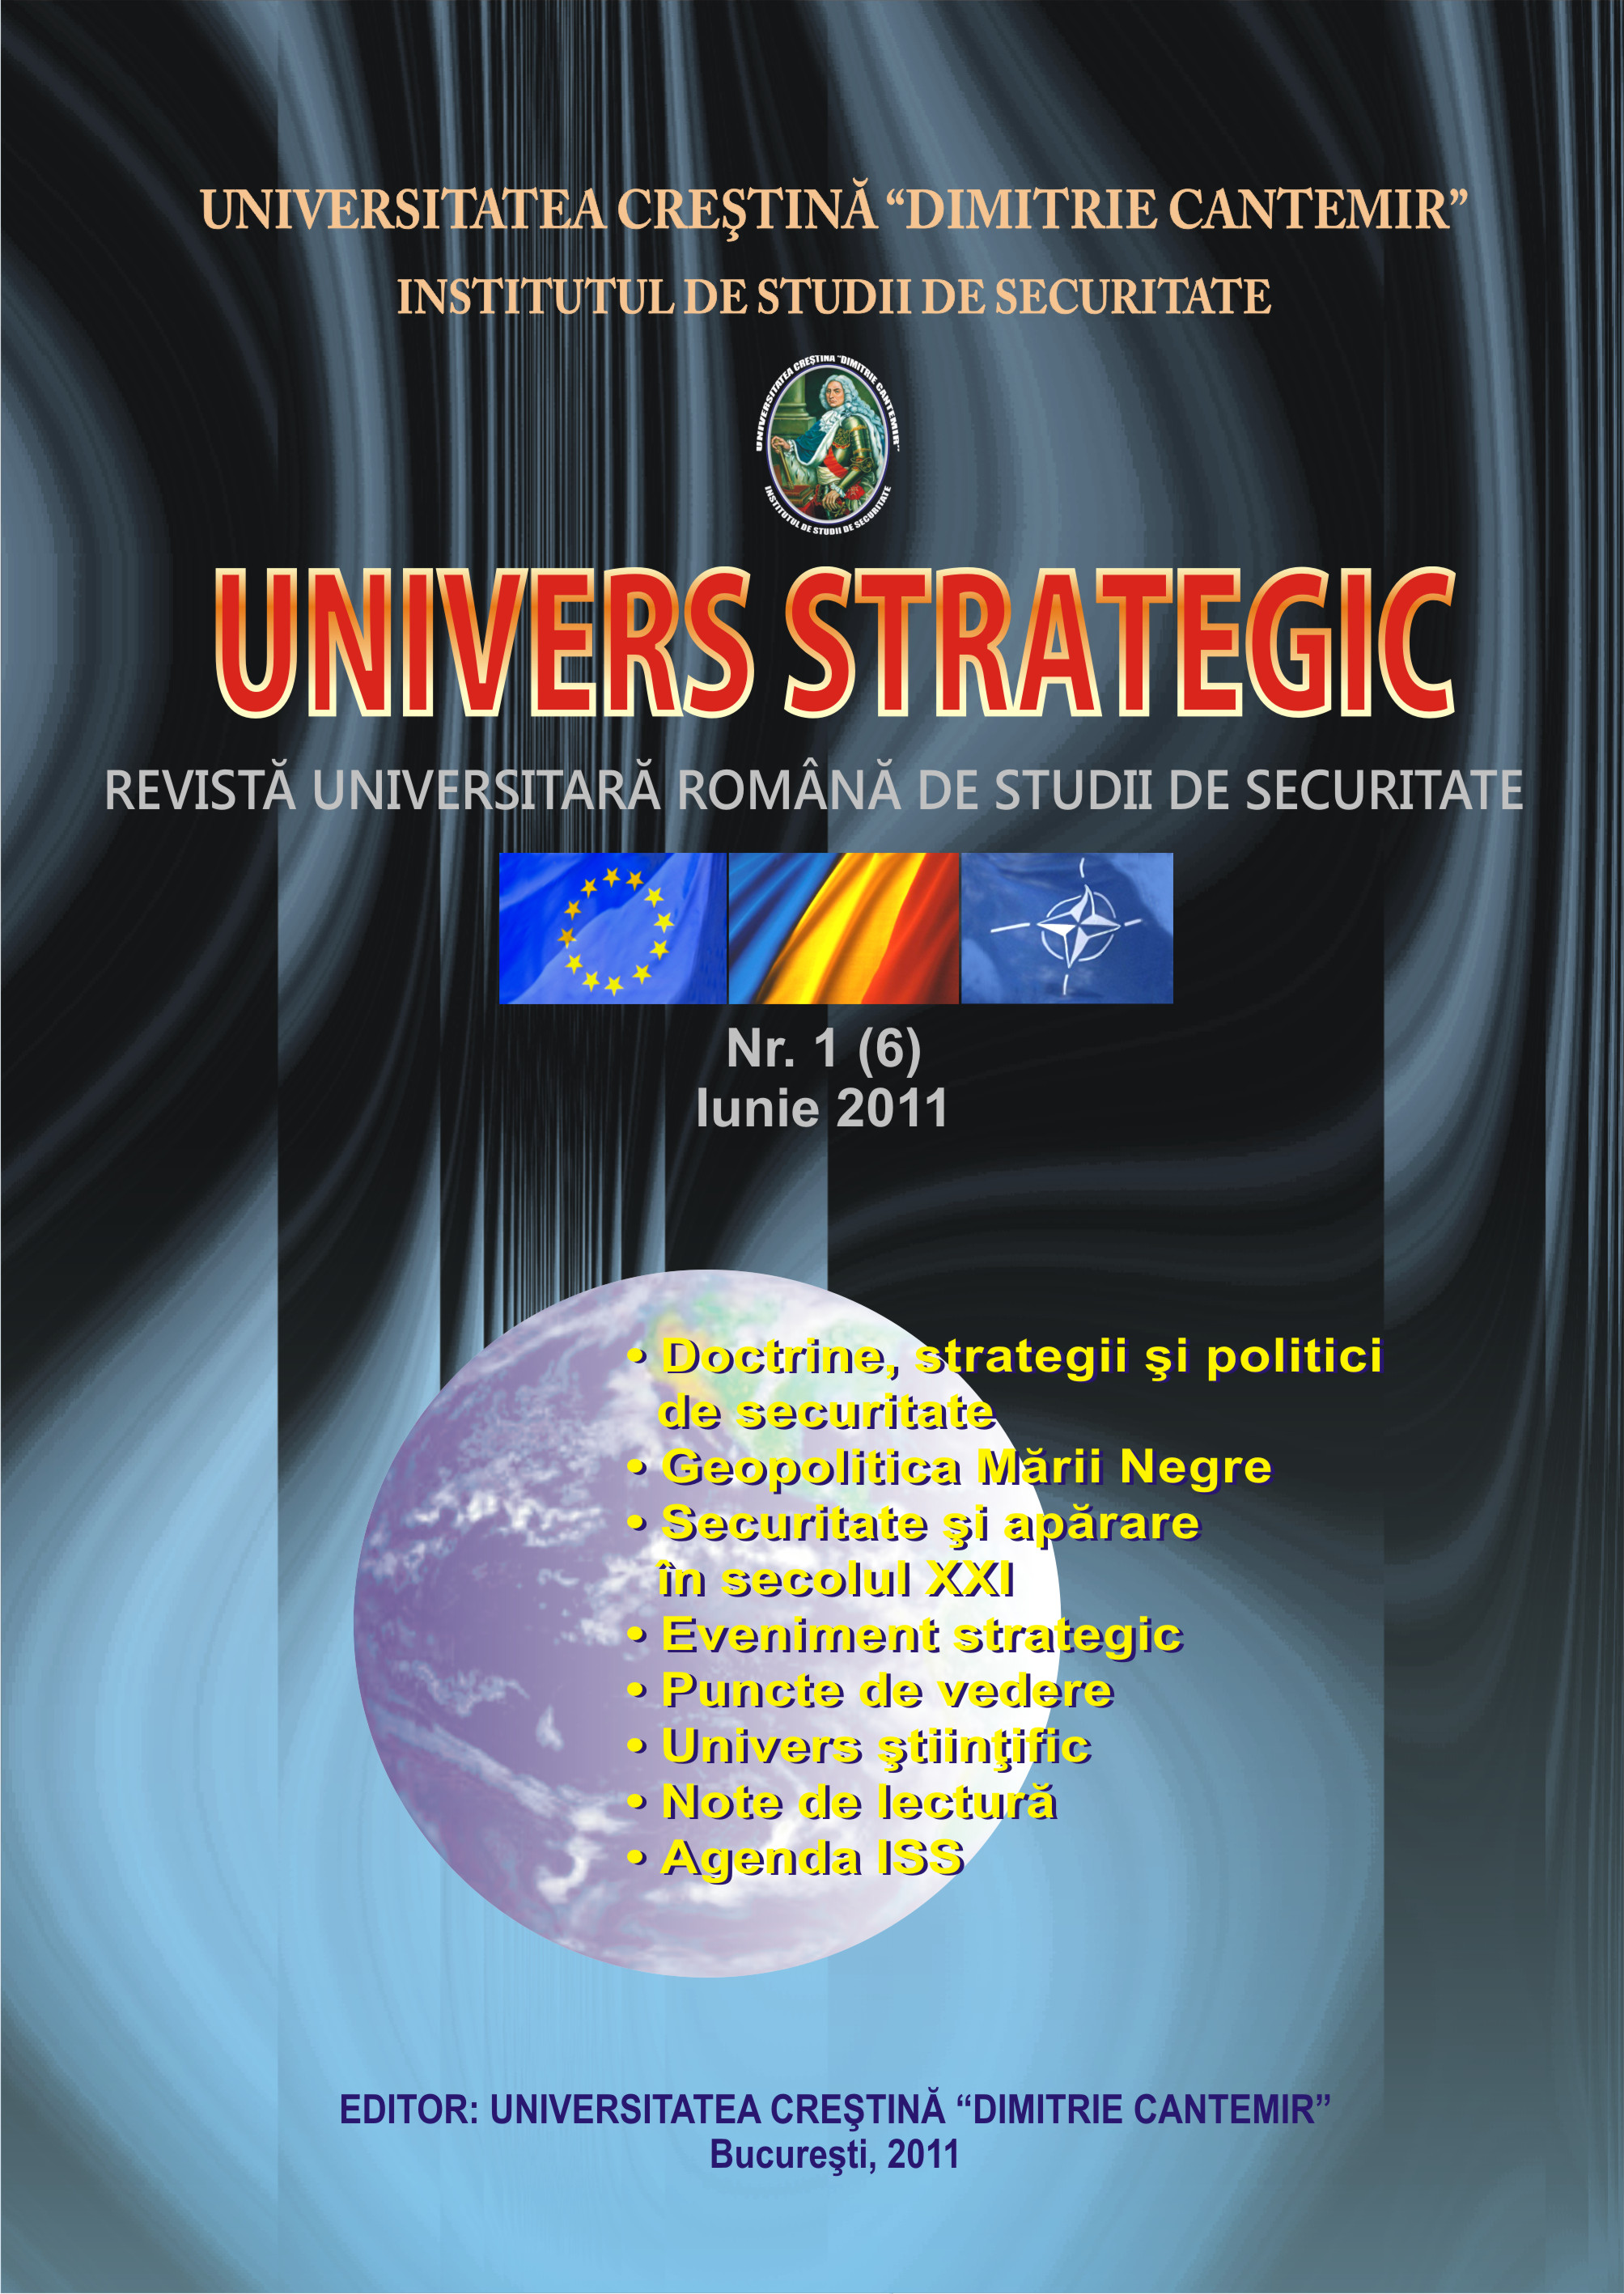 RUSE FEDERATION PROGRESS IN THE USE AND CONTRACTING OF NON-CONVENTIONAL AGGRESSES Cover Image